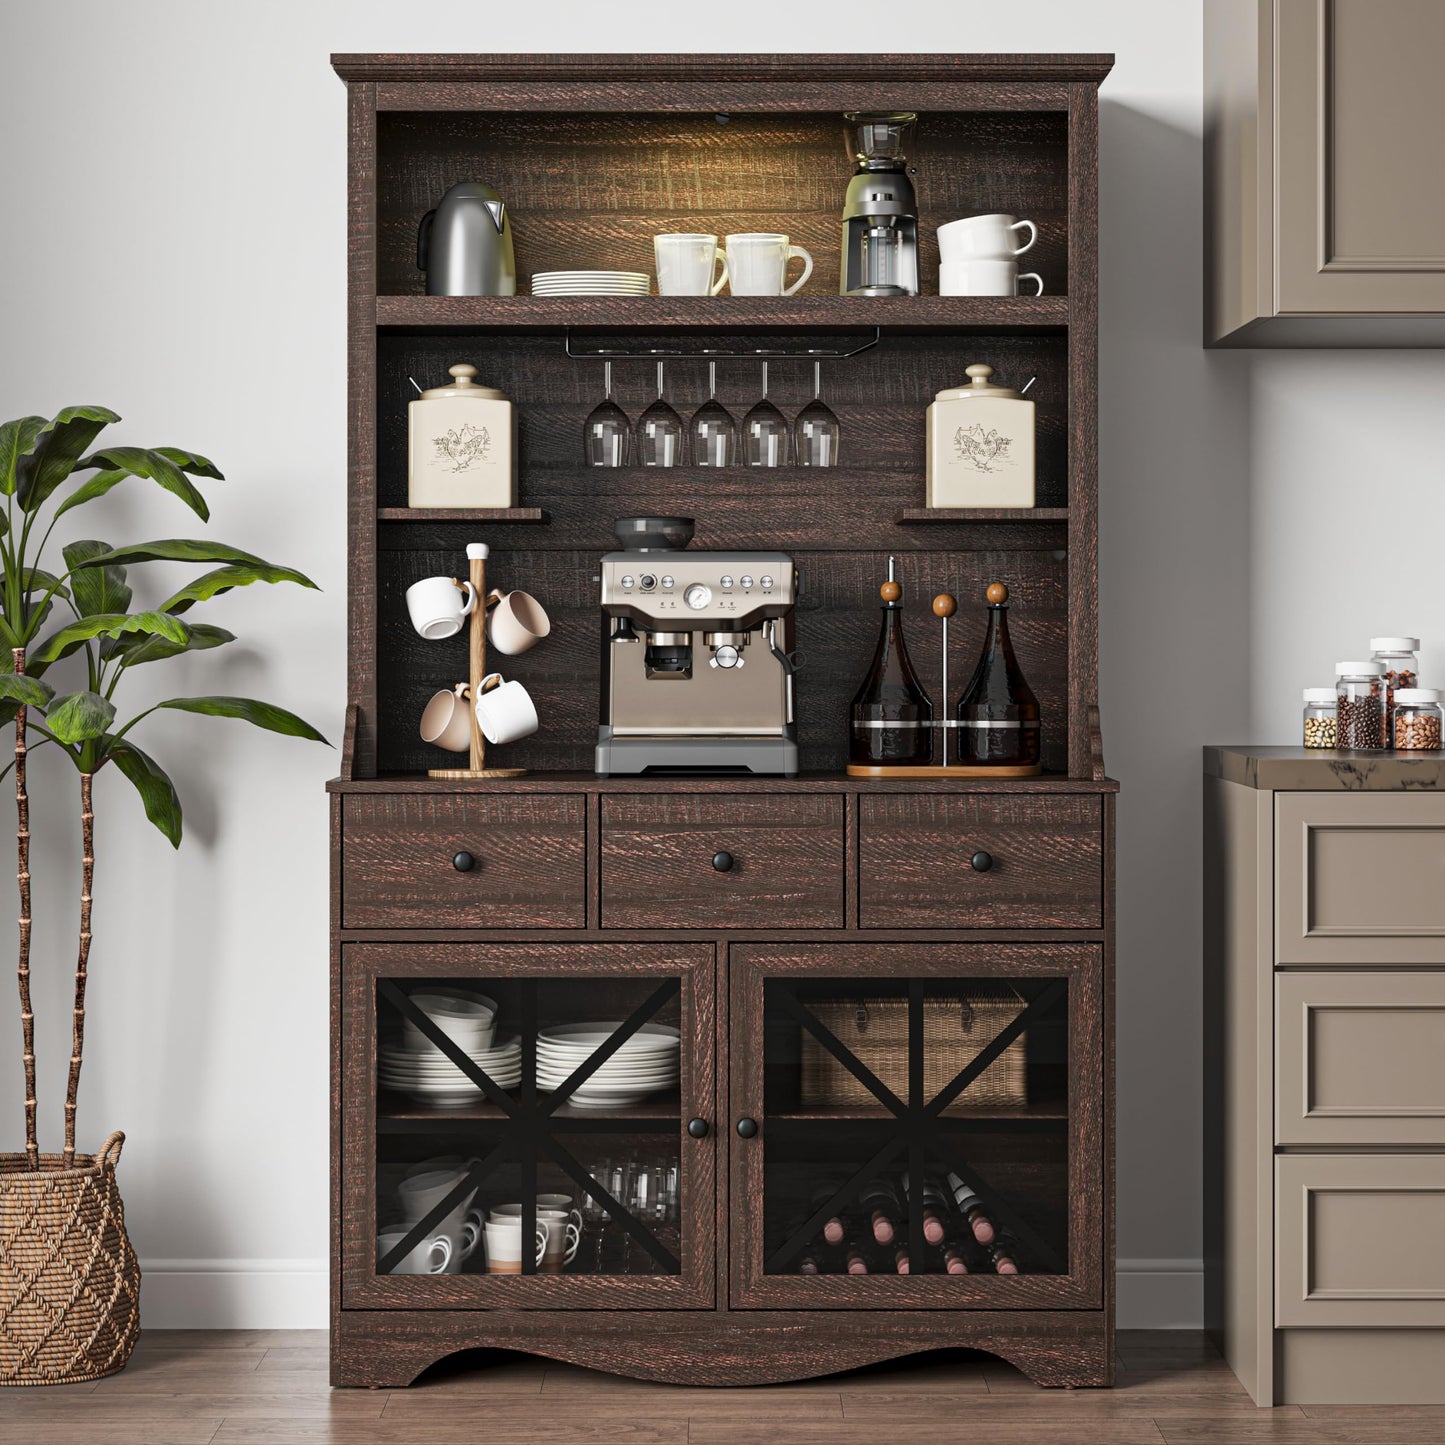 RoyalCraft 71'' Tall Farmhouse Bar Cabinet, Retro Buffet Cabinet with Charge Station & LED Lights, Liquor Cabinet Bar with Wine Bottle Rack for Kitchen, Living Room, Brown